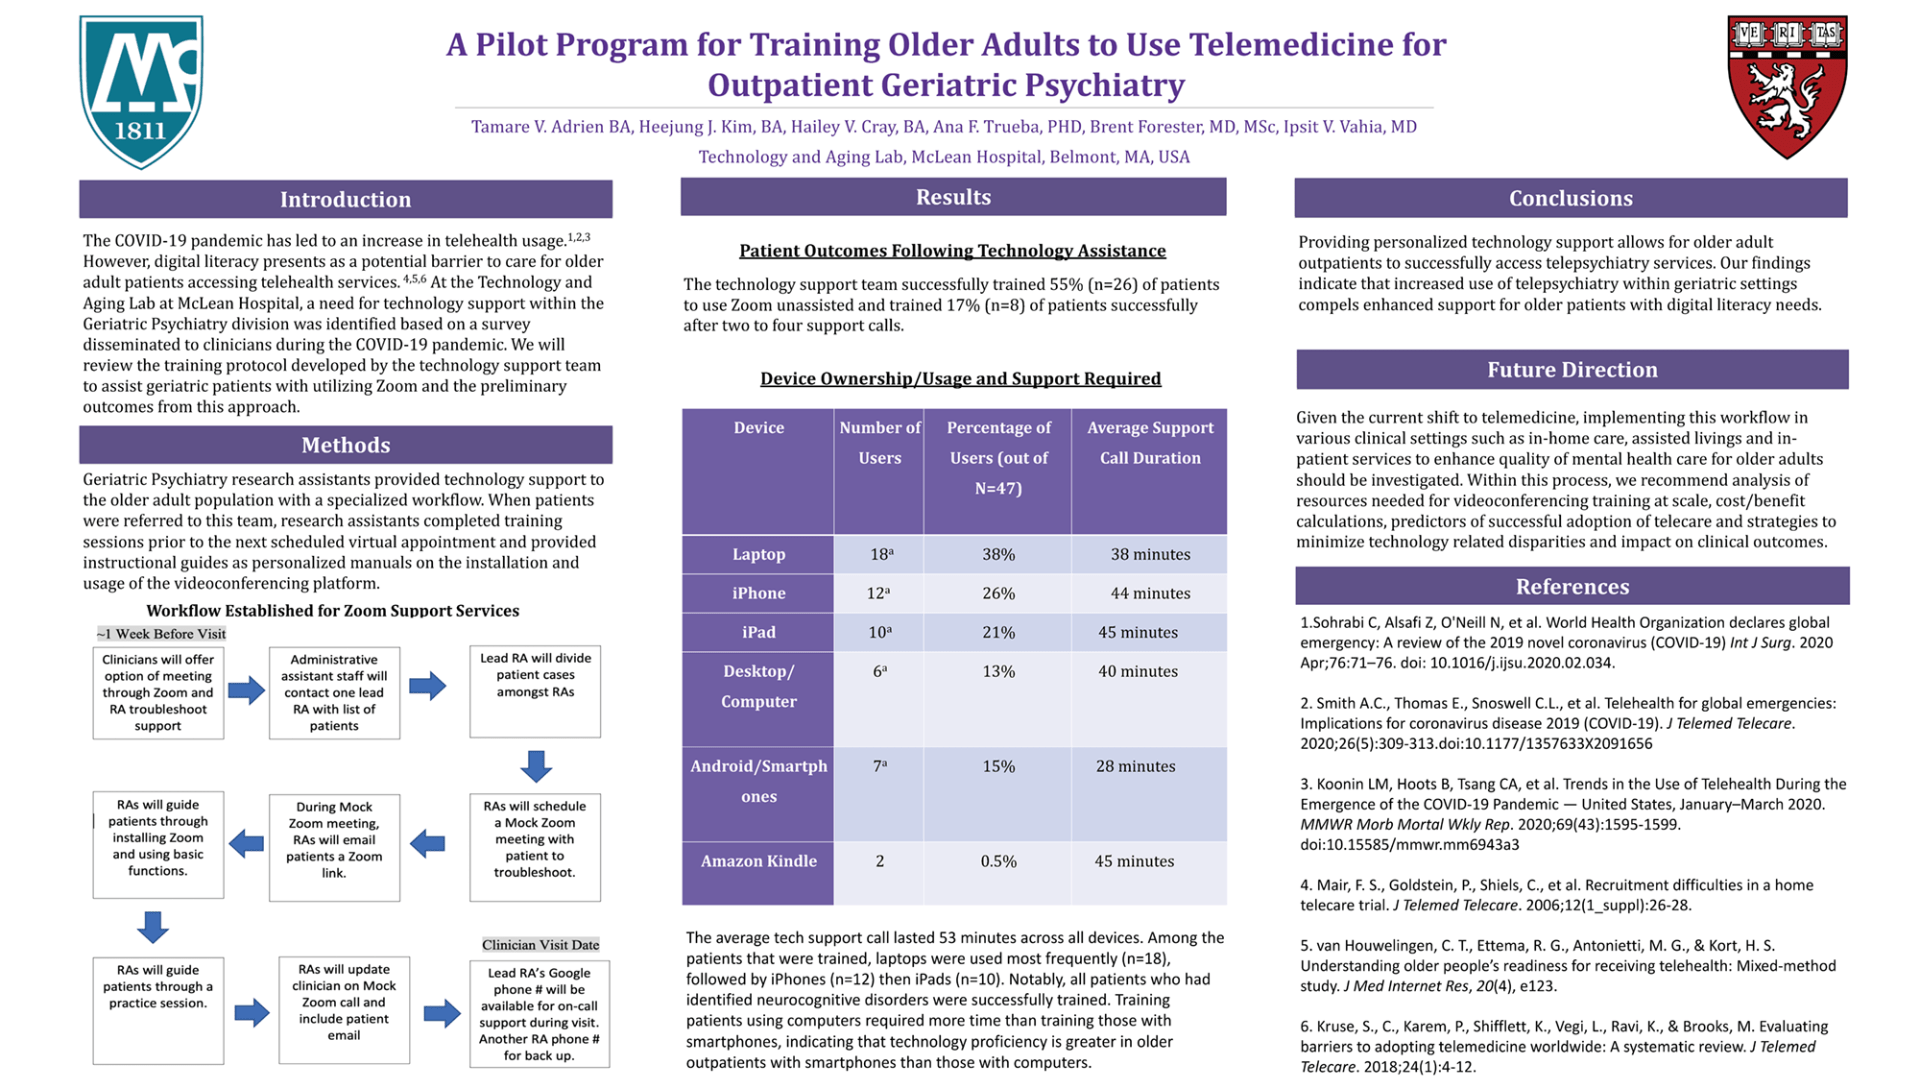 A Pilot Program for Training Older Adults to use Telemedicine for Outpatient Geriatric Psychiatry